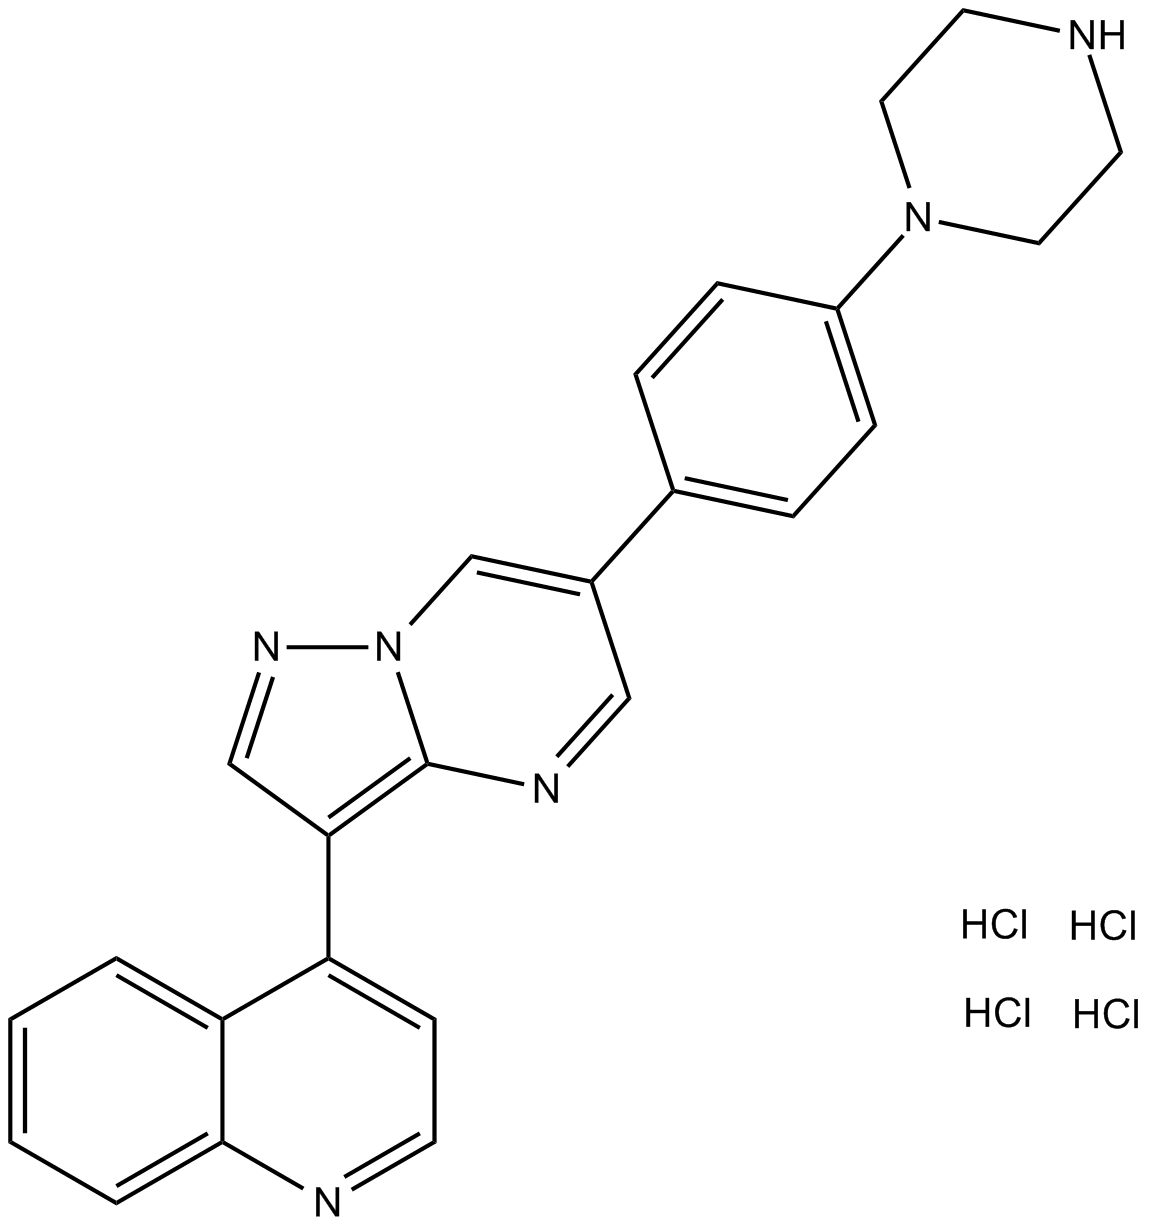 LDN193189 Hydrochloride  Chemical Structure